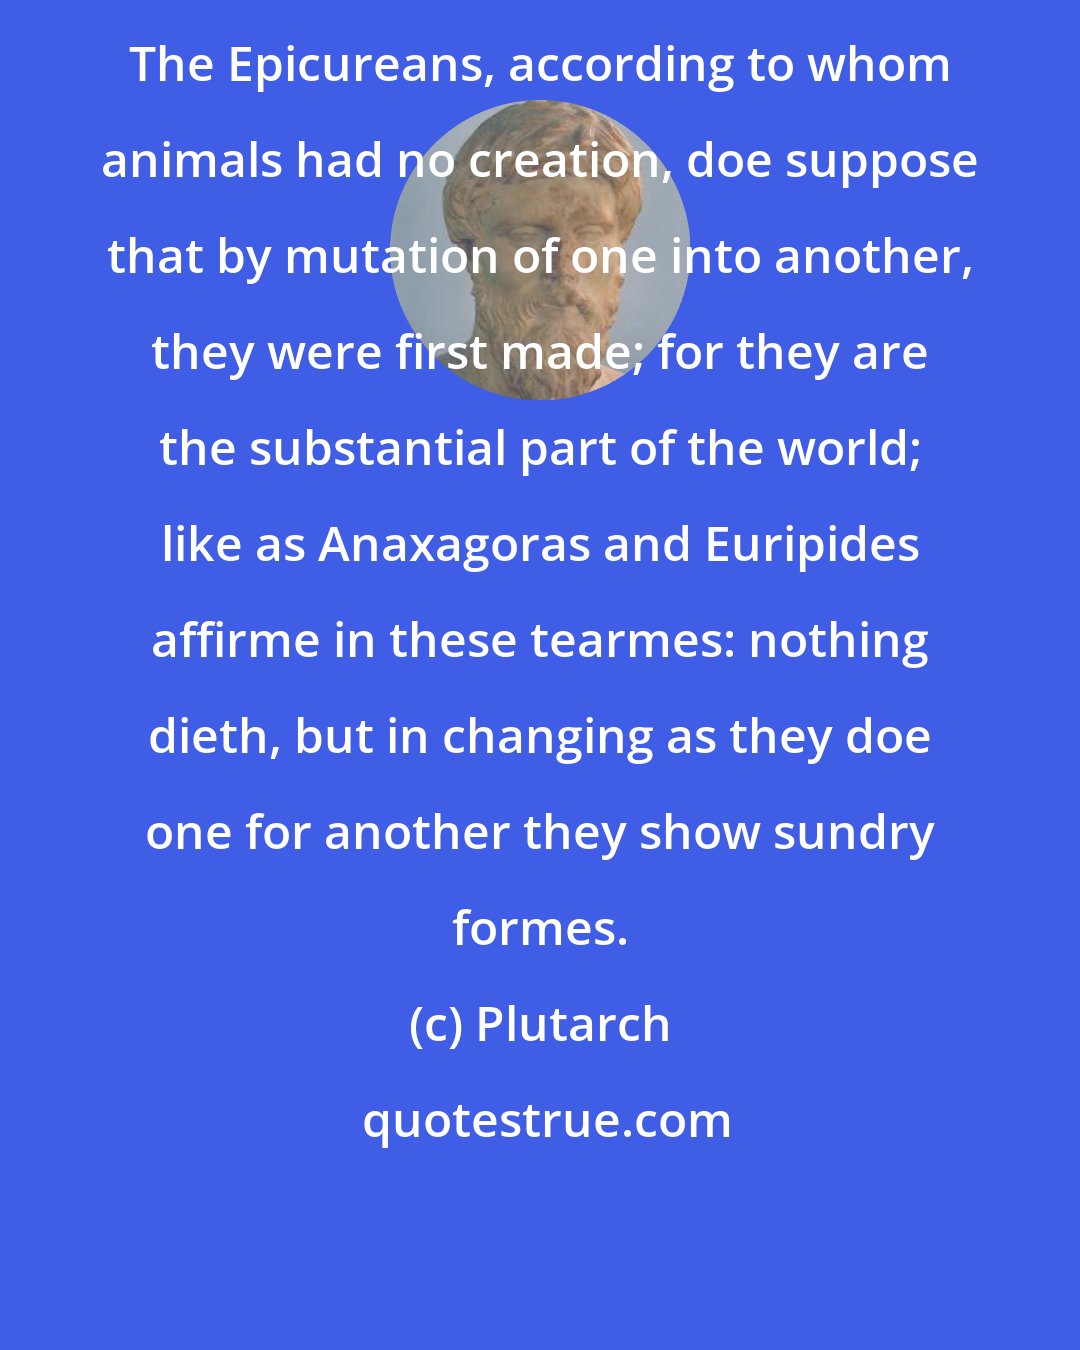 Plutarch: The Epicureans, according to whom animals had no creation, doe suppose that by mutation of one into another, they were first made; for they are the substantial part of the world; like as Anaxagoras and Euripides affirme in these tearmes: nothing dieth, but in changing as they doe one for another they show sundry formes.